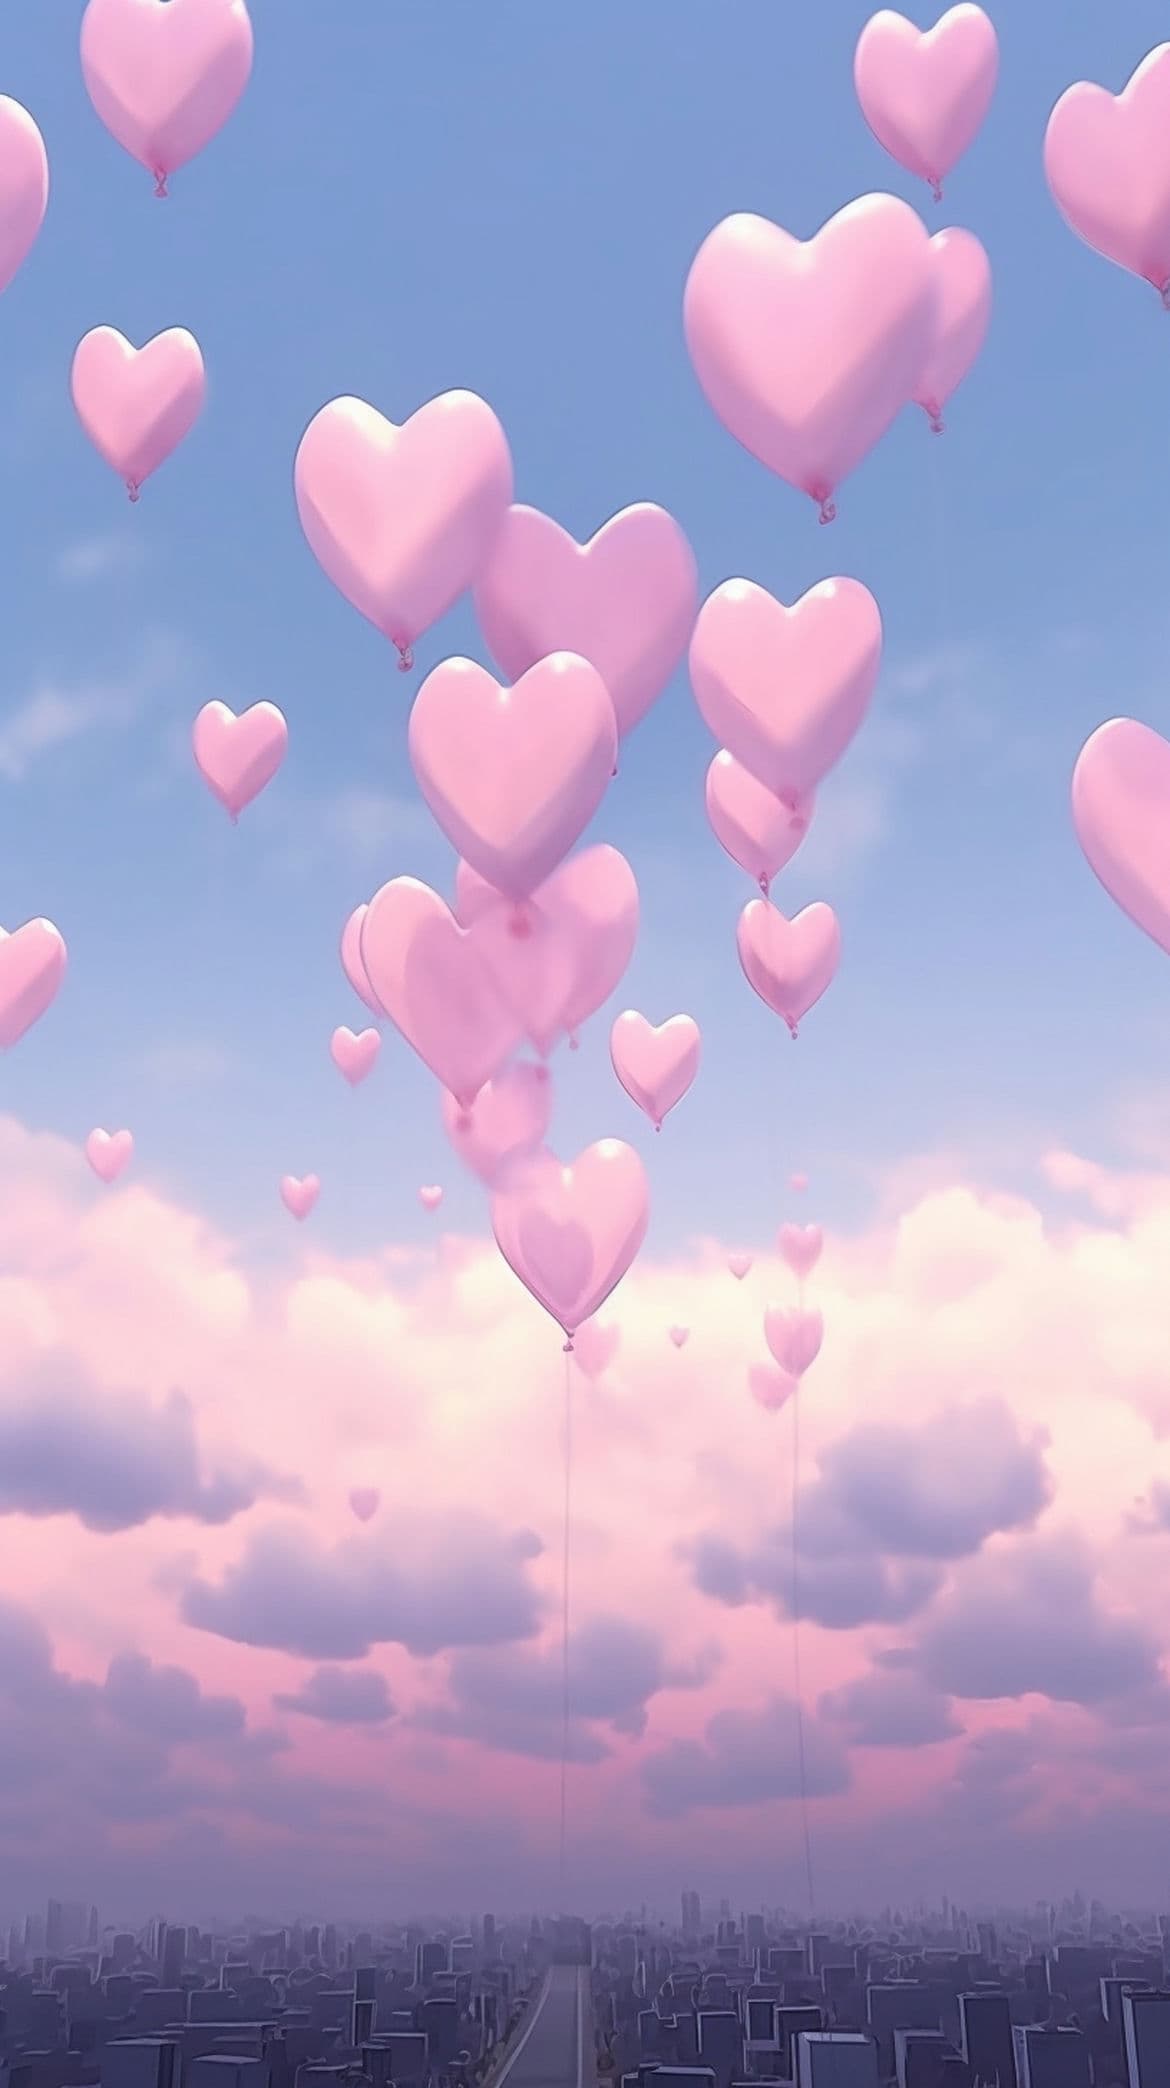 Pink heart balloons floating in the sky - Balloons